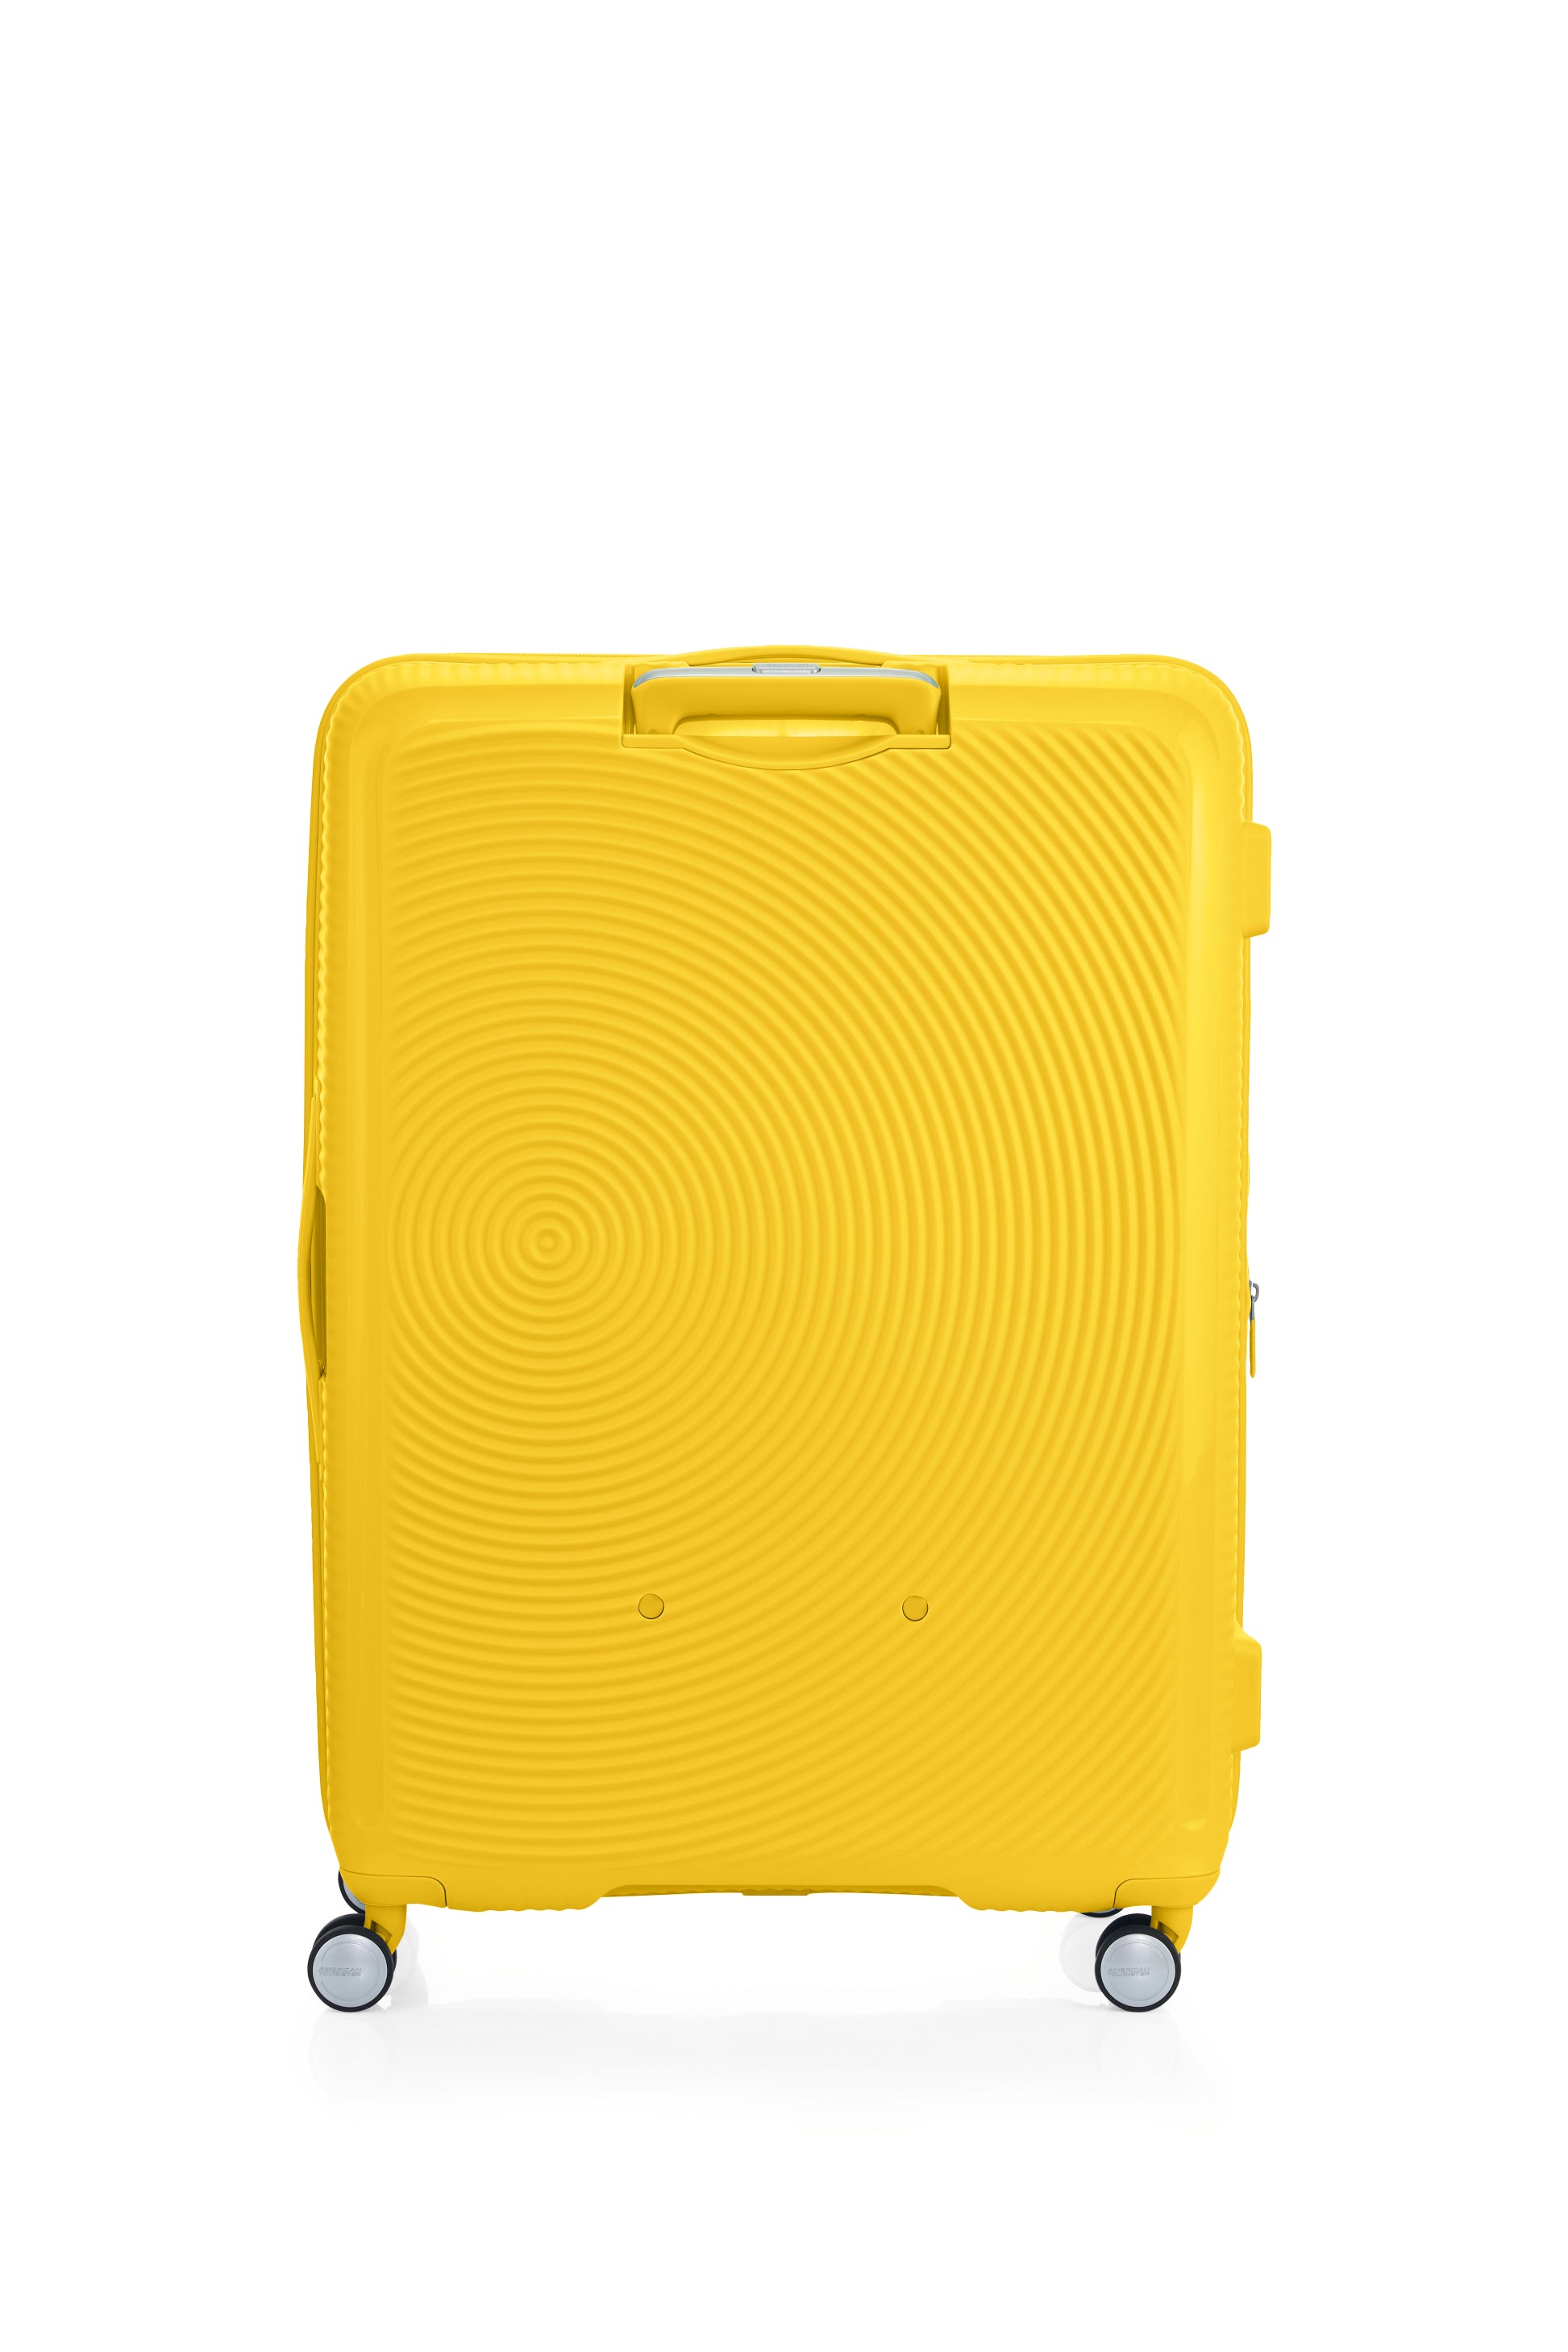 American Tourister - Curio 2.0 80cm Large Suitcase - Golden Yellow-1